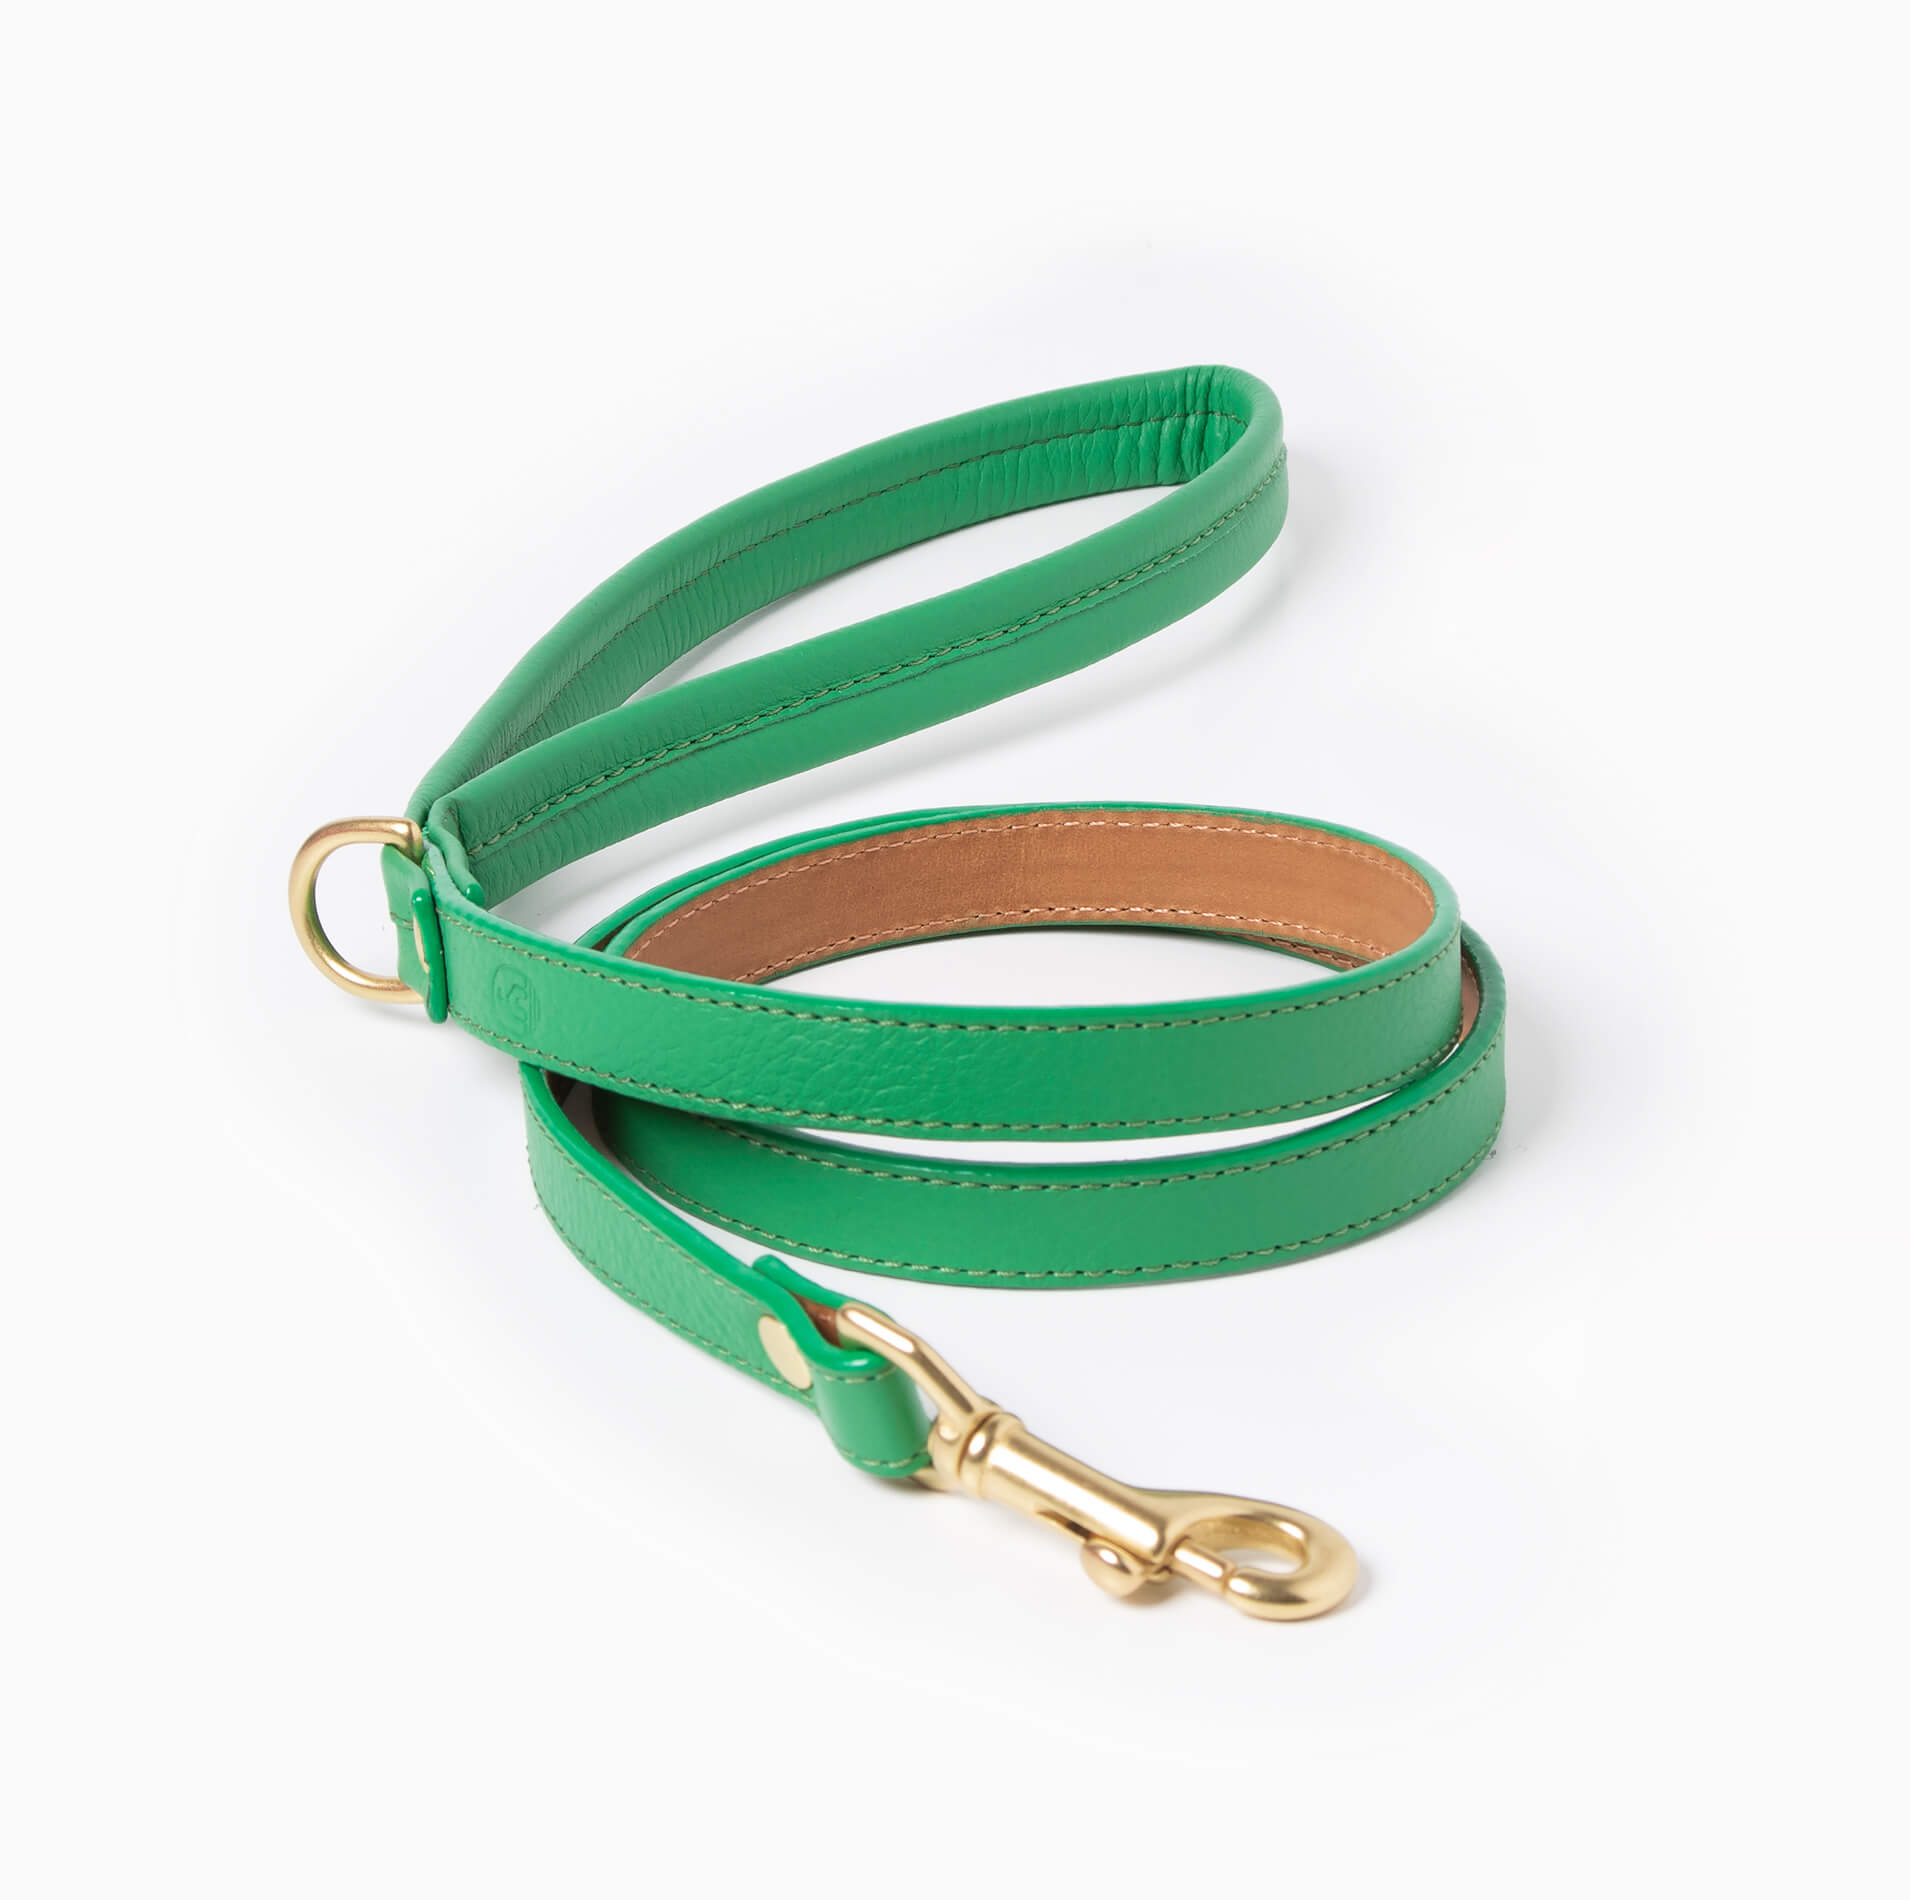 Emerald green leather dog leash with brass hardware